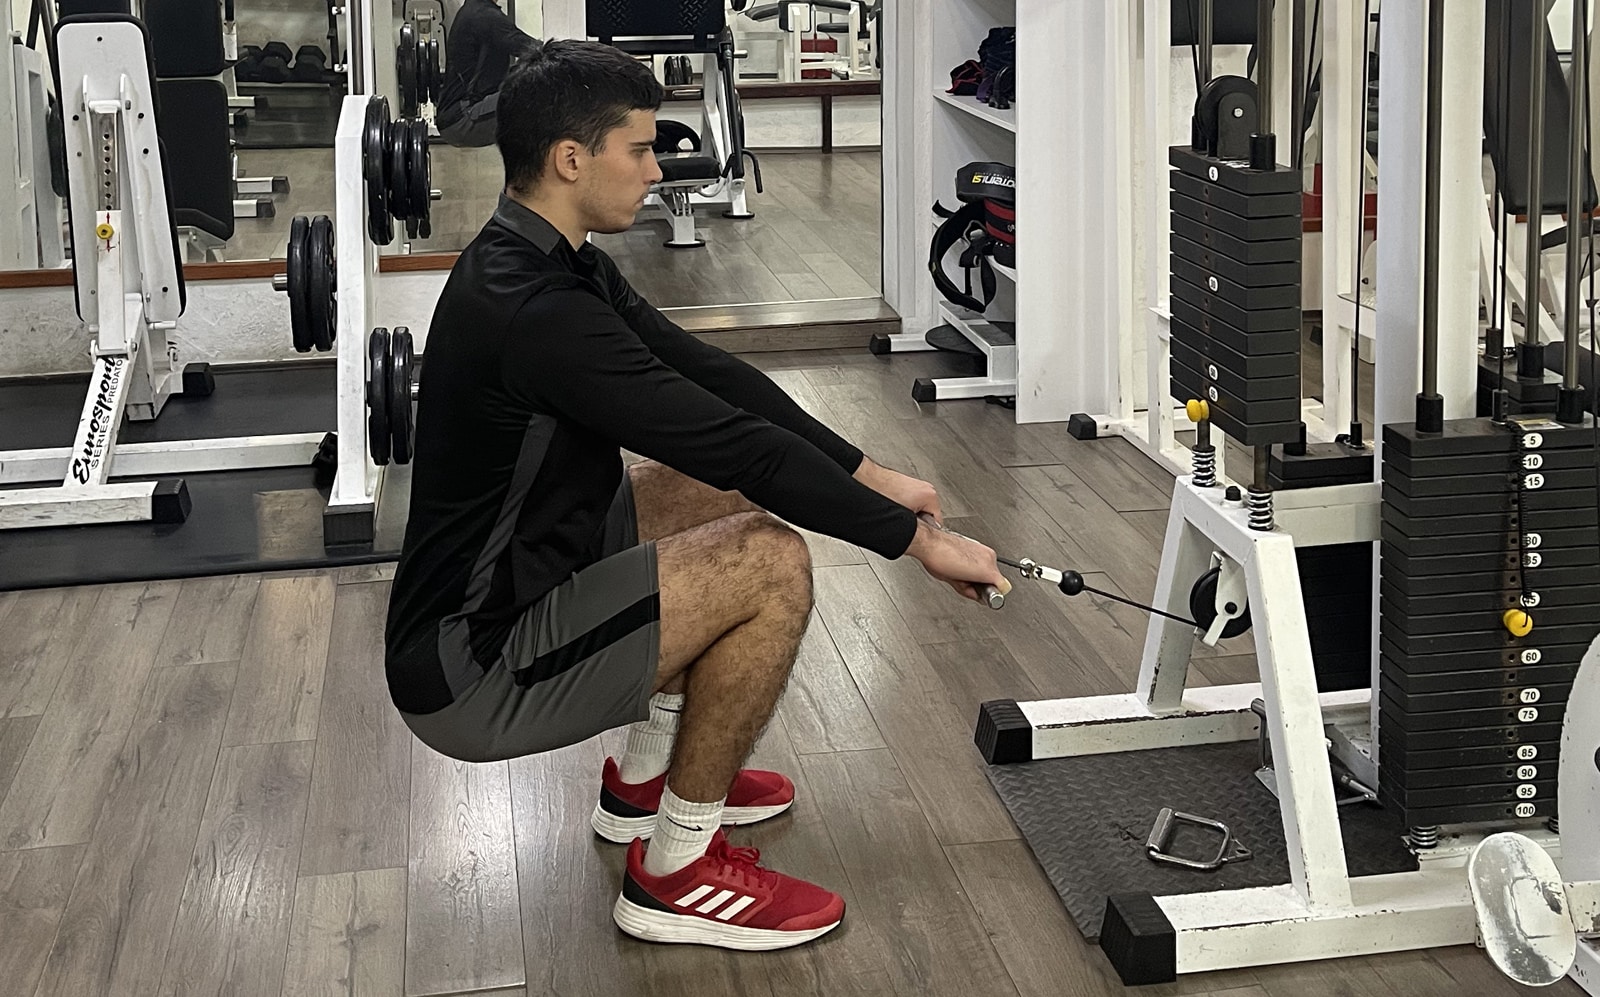 Cable Leg Extension Exercise Guide — How to, Benefits, and More